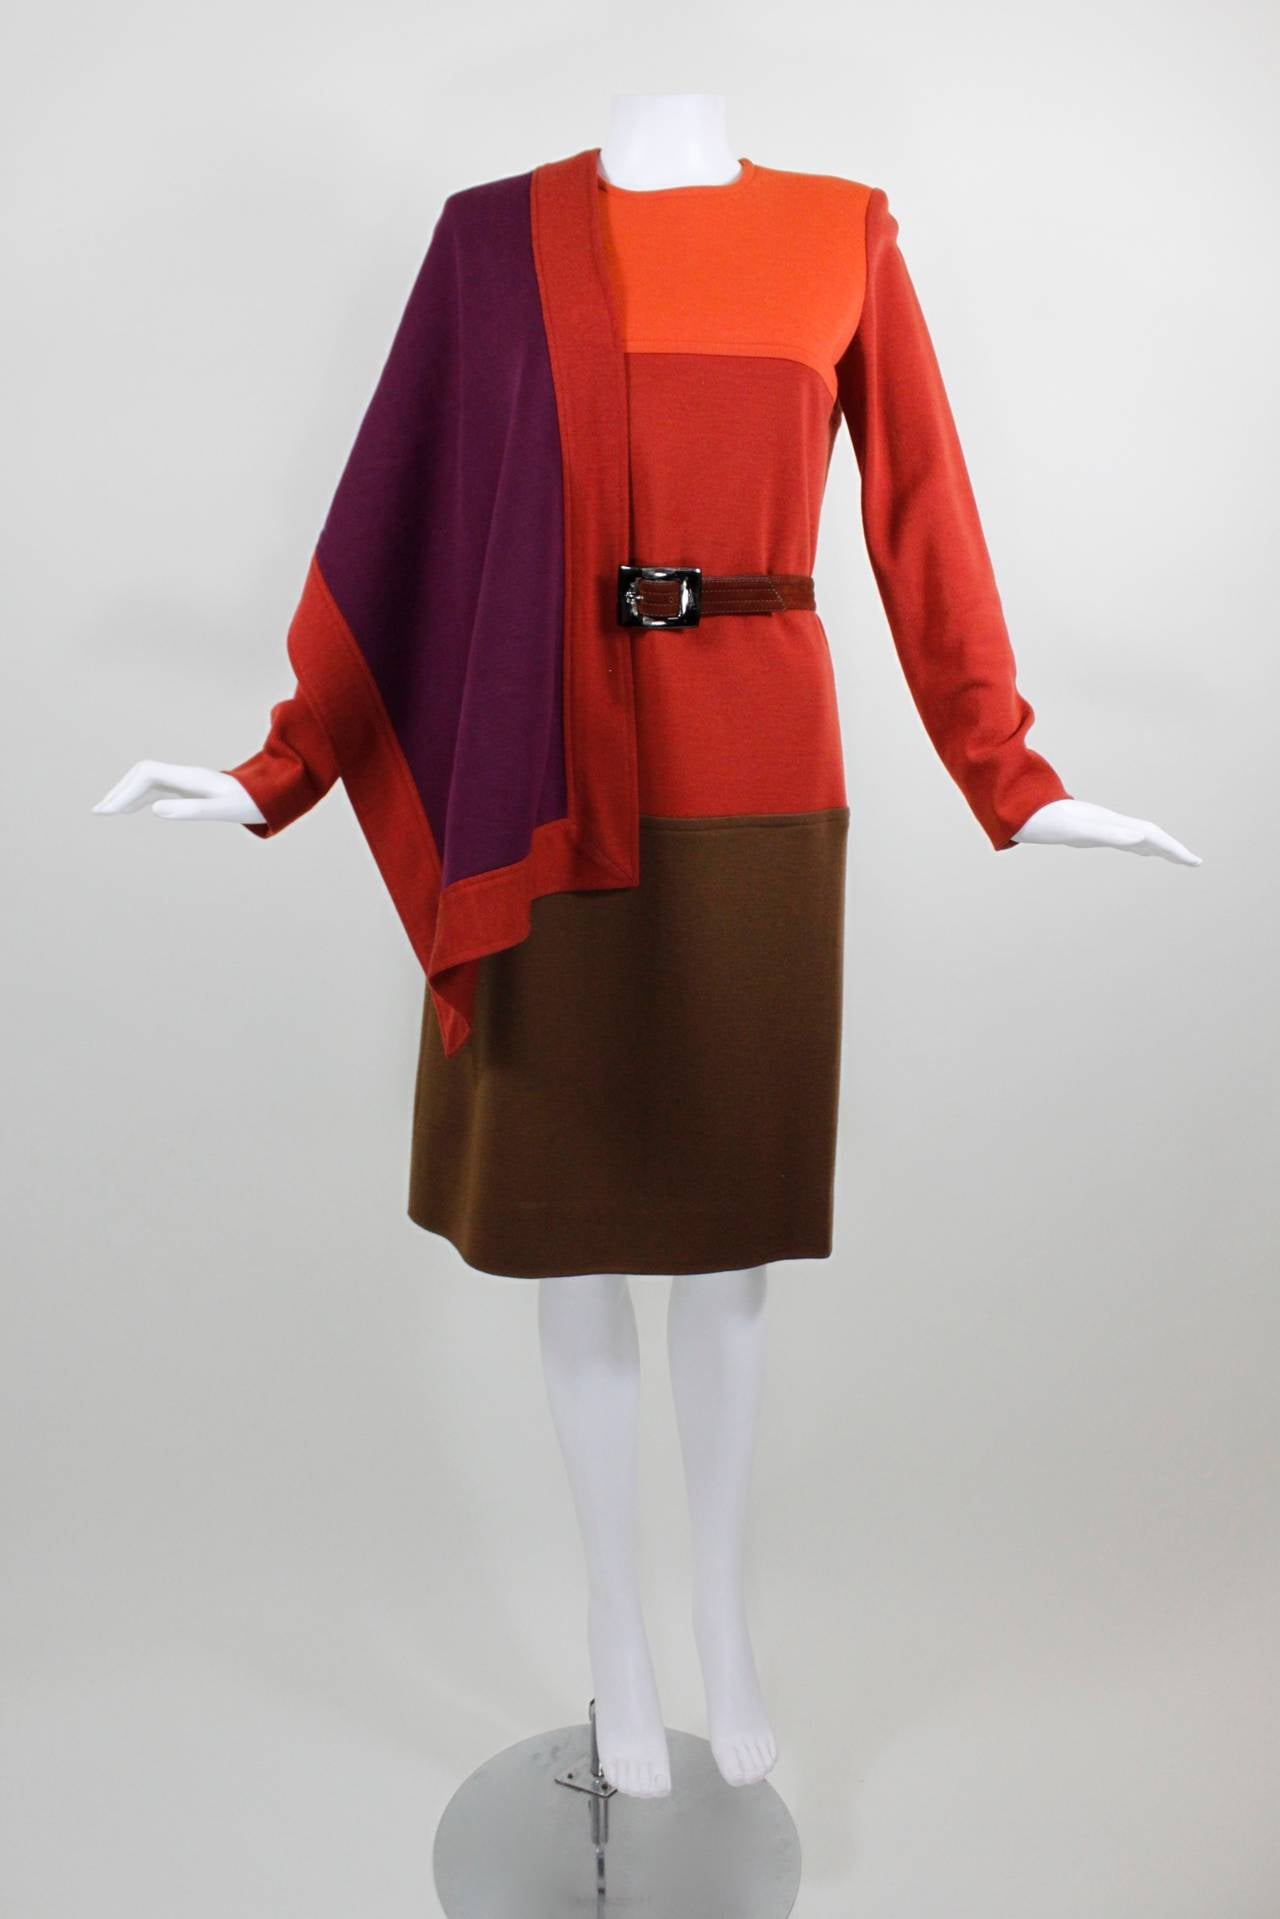 This is the perfect fall dress from YSL. Shades of orange, magenta, and hazel come together beautifully in this colorblocked wool dress. A high neck and long sleeves are balanced by a cocktail-length hem. The dress has an accompanying stole and